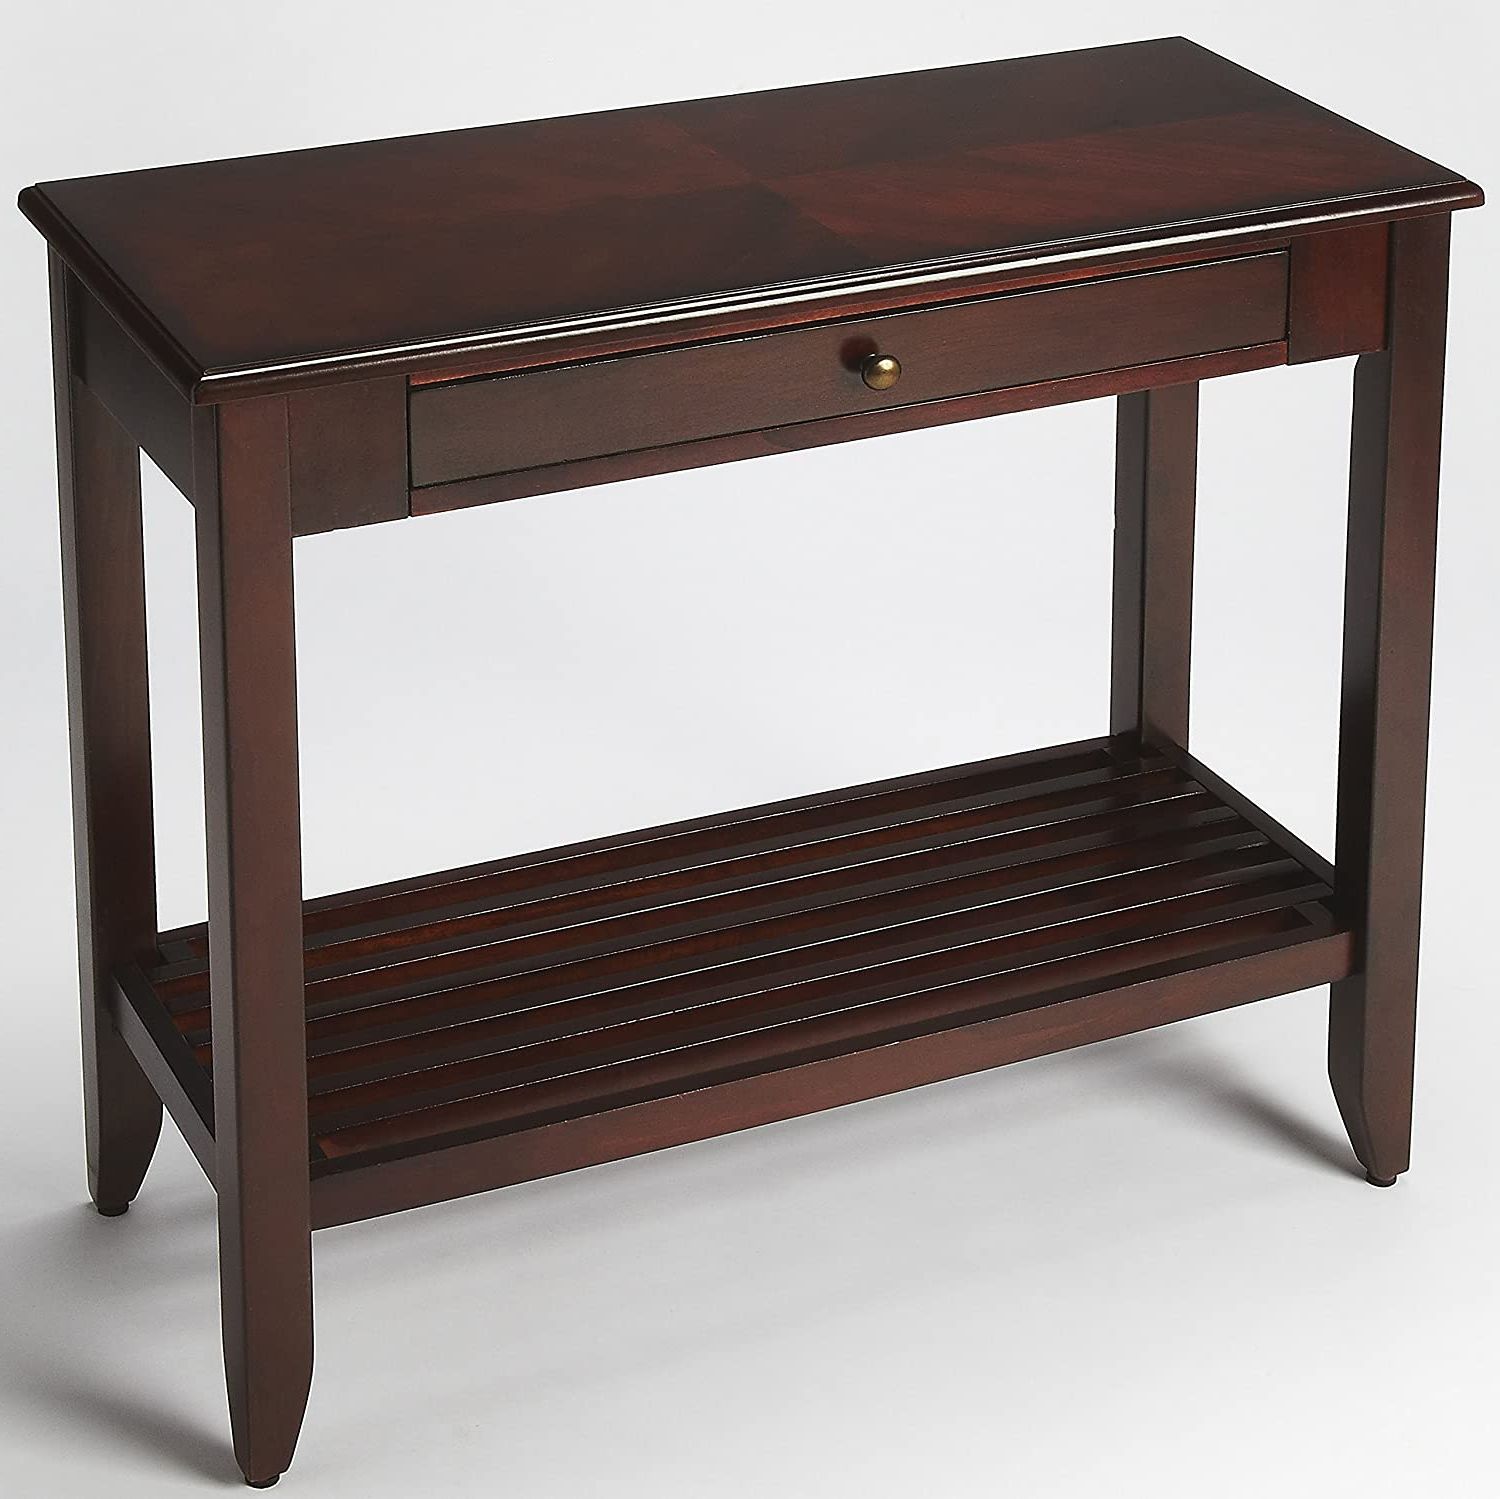 Well Known Amazon: Butler Console Table In Plantation Cherry In Heartwood Cherry Wood Console Tables (View 2 of 10)